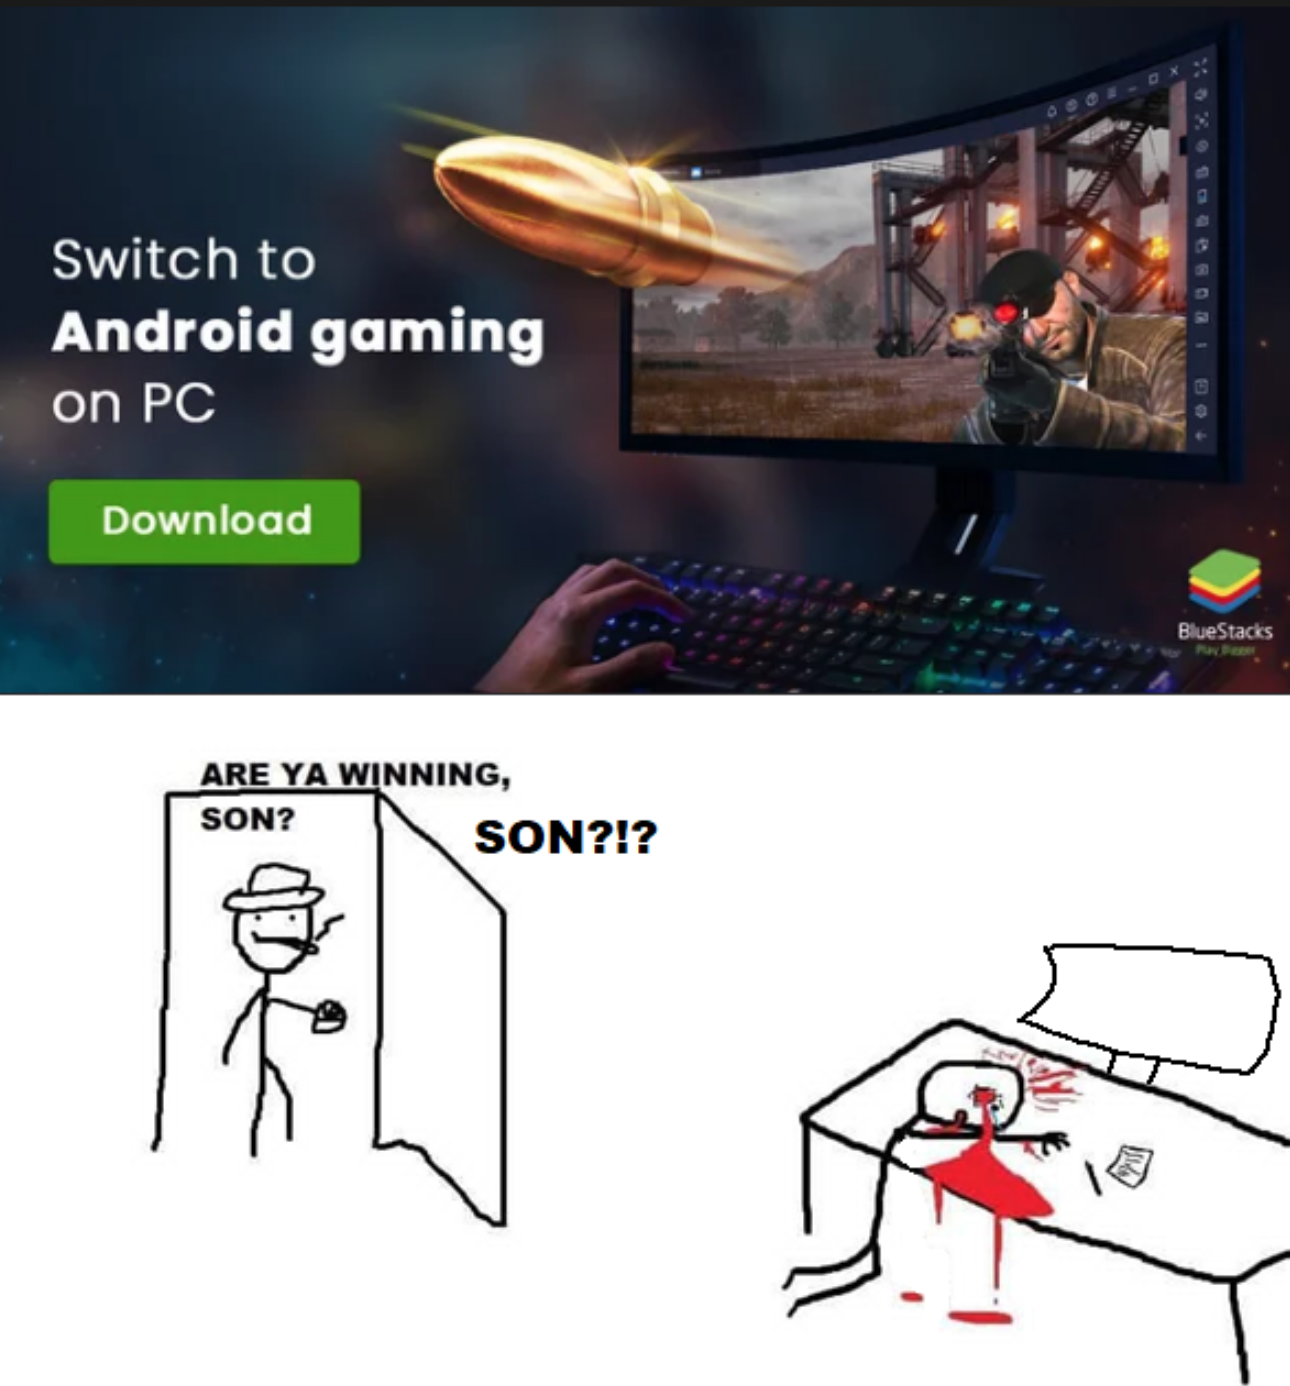 funny gaming memes - switch to android gaming on pc meme - Switch to Android gaming on Pc Download BlueStacks Are Ya Winning, Son? Son?!?